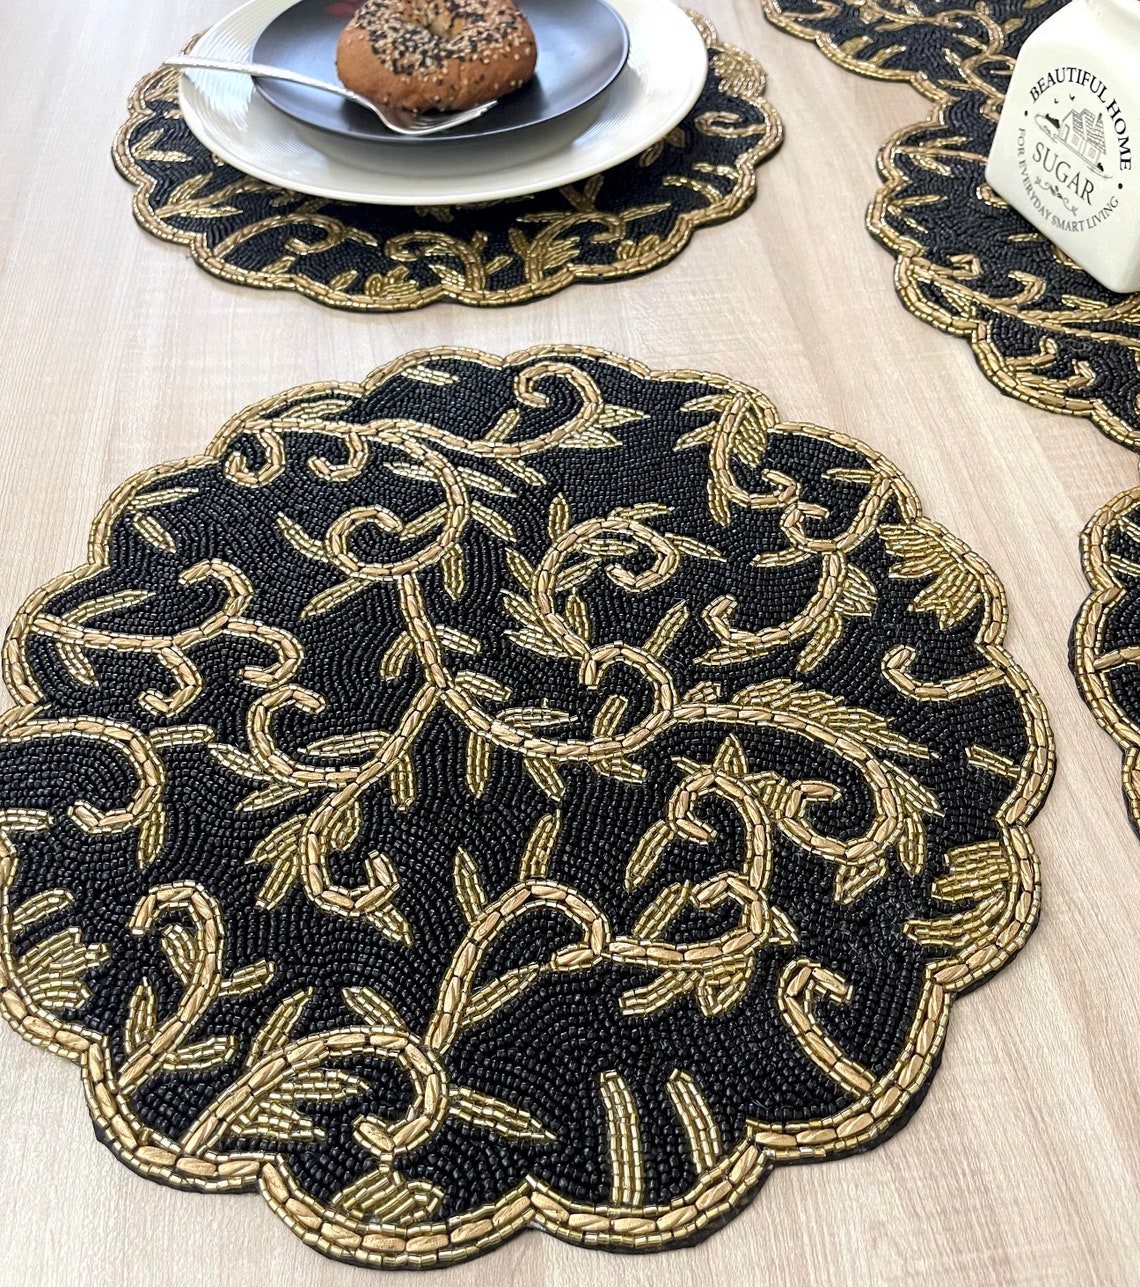 Handmade beaded placemat beaded tablemat 14 inch black gold | Etsy